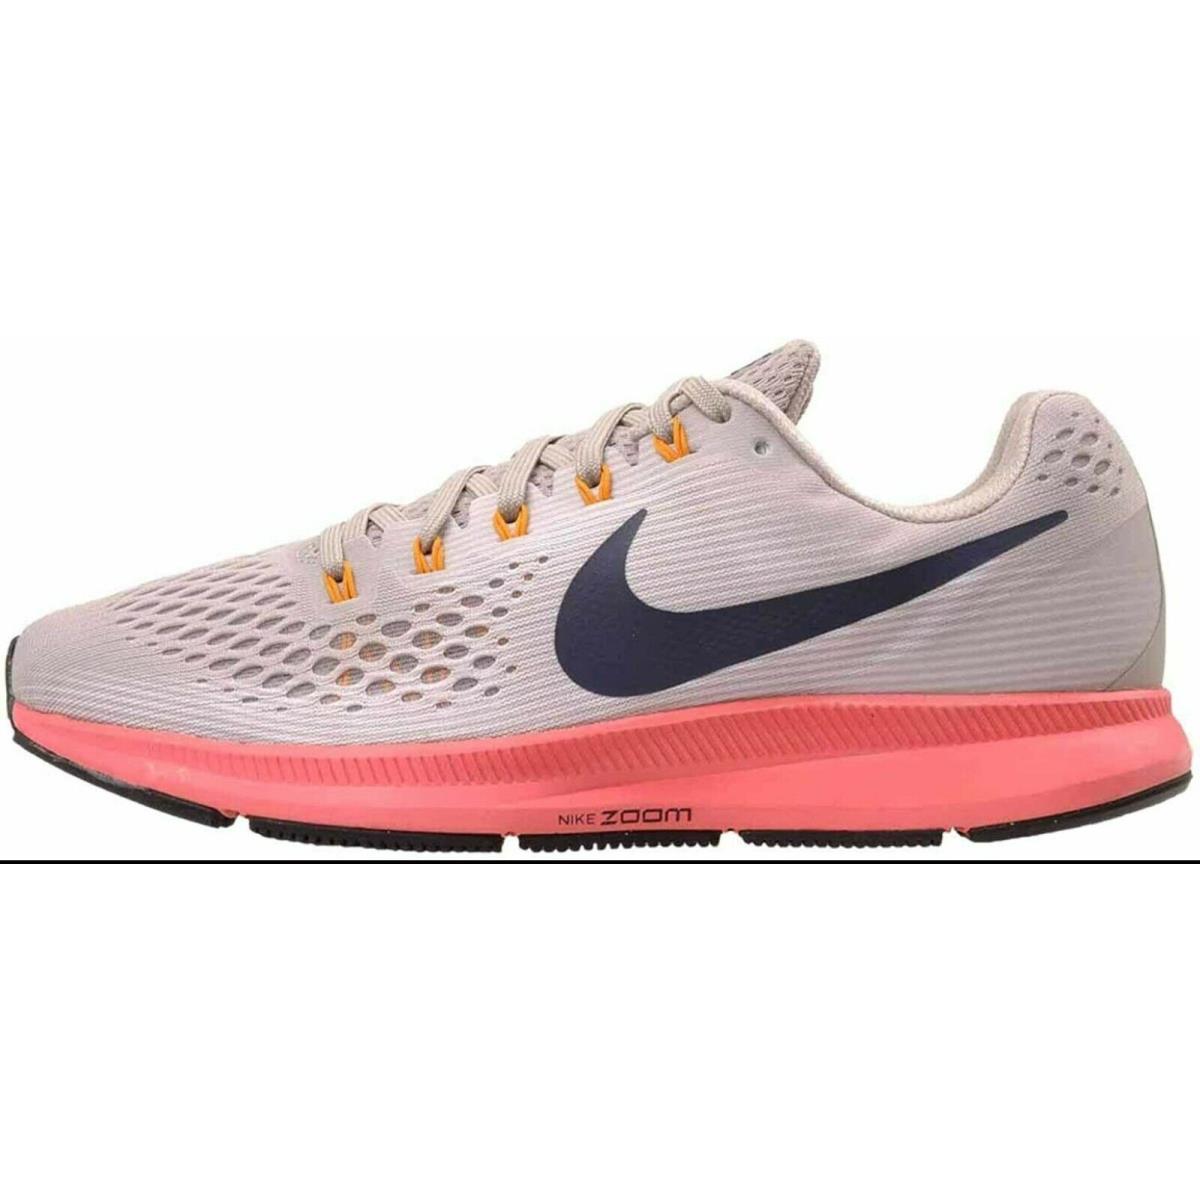 Size 10.5 Nike Mens Air Zoompegasus 34Gray Pink Running Sneakers Shoes880555 200